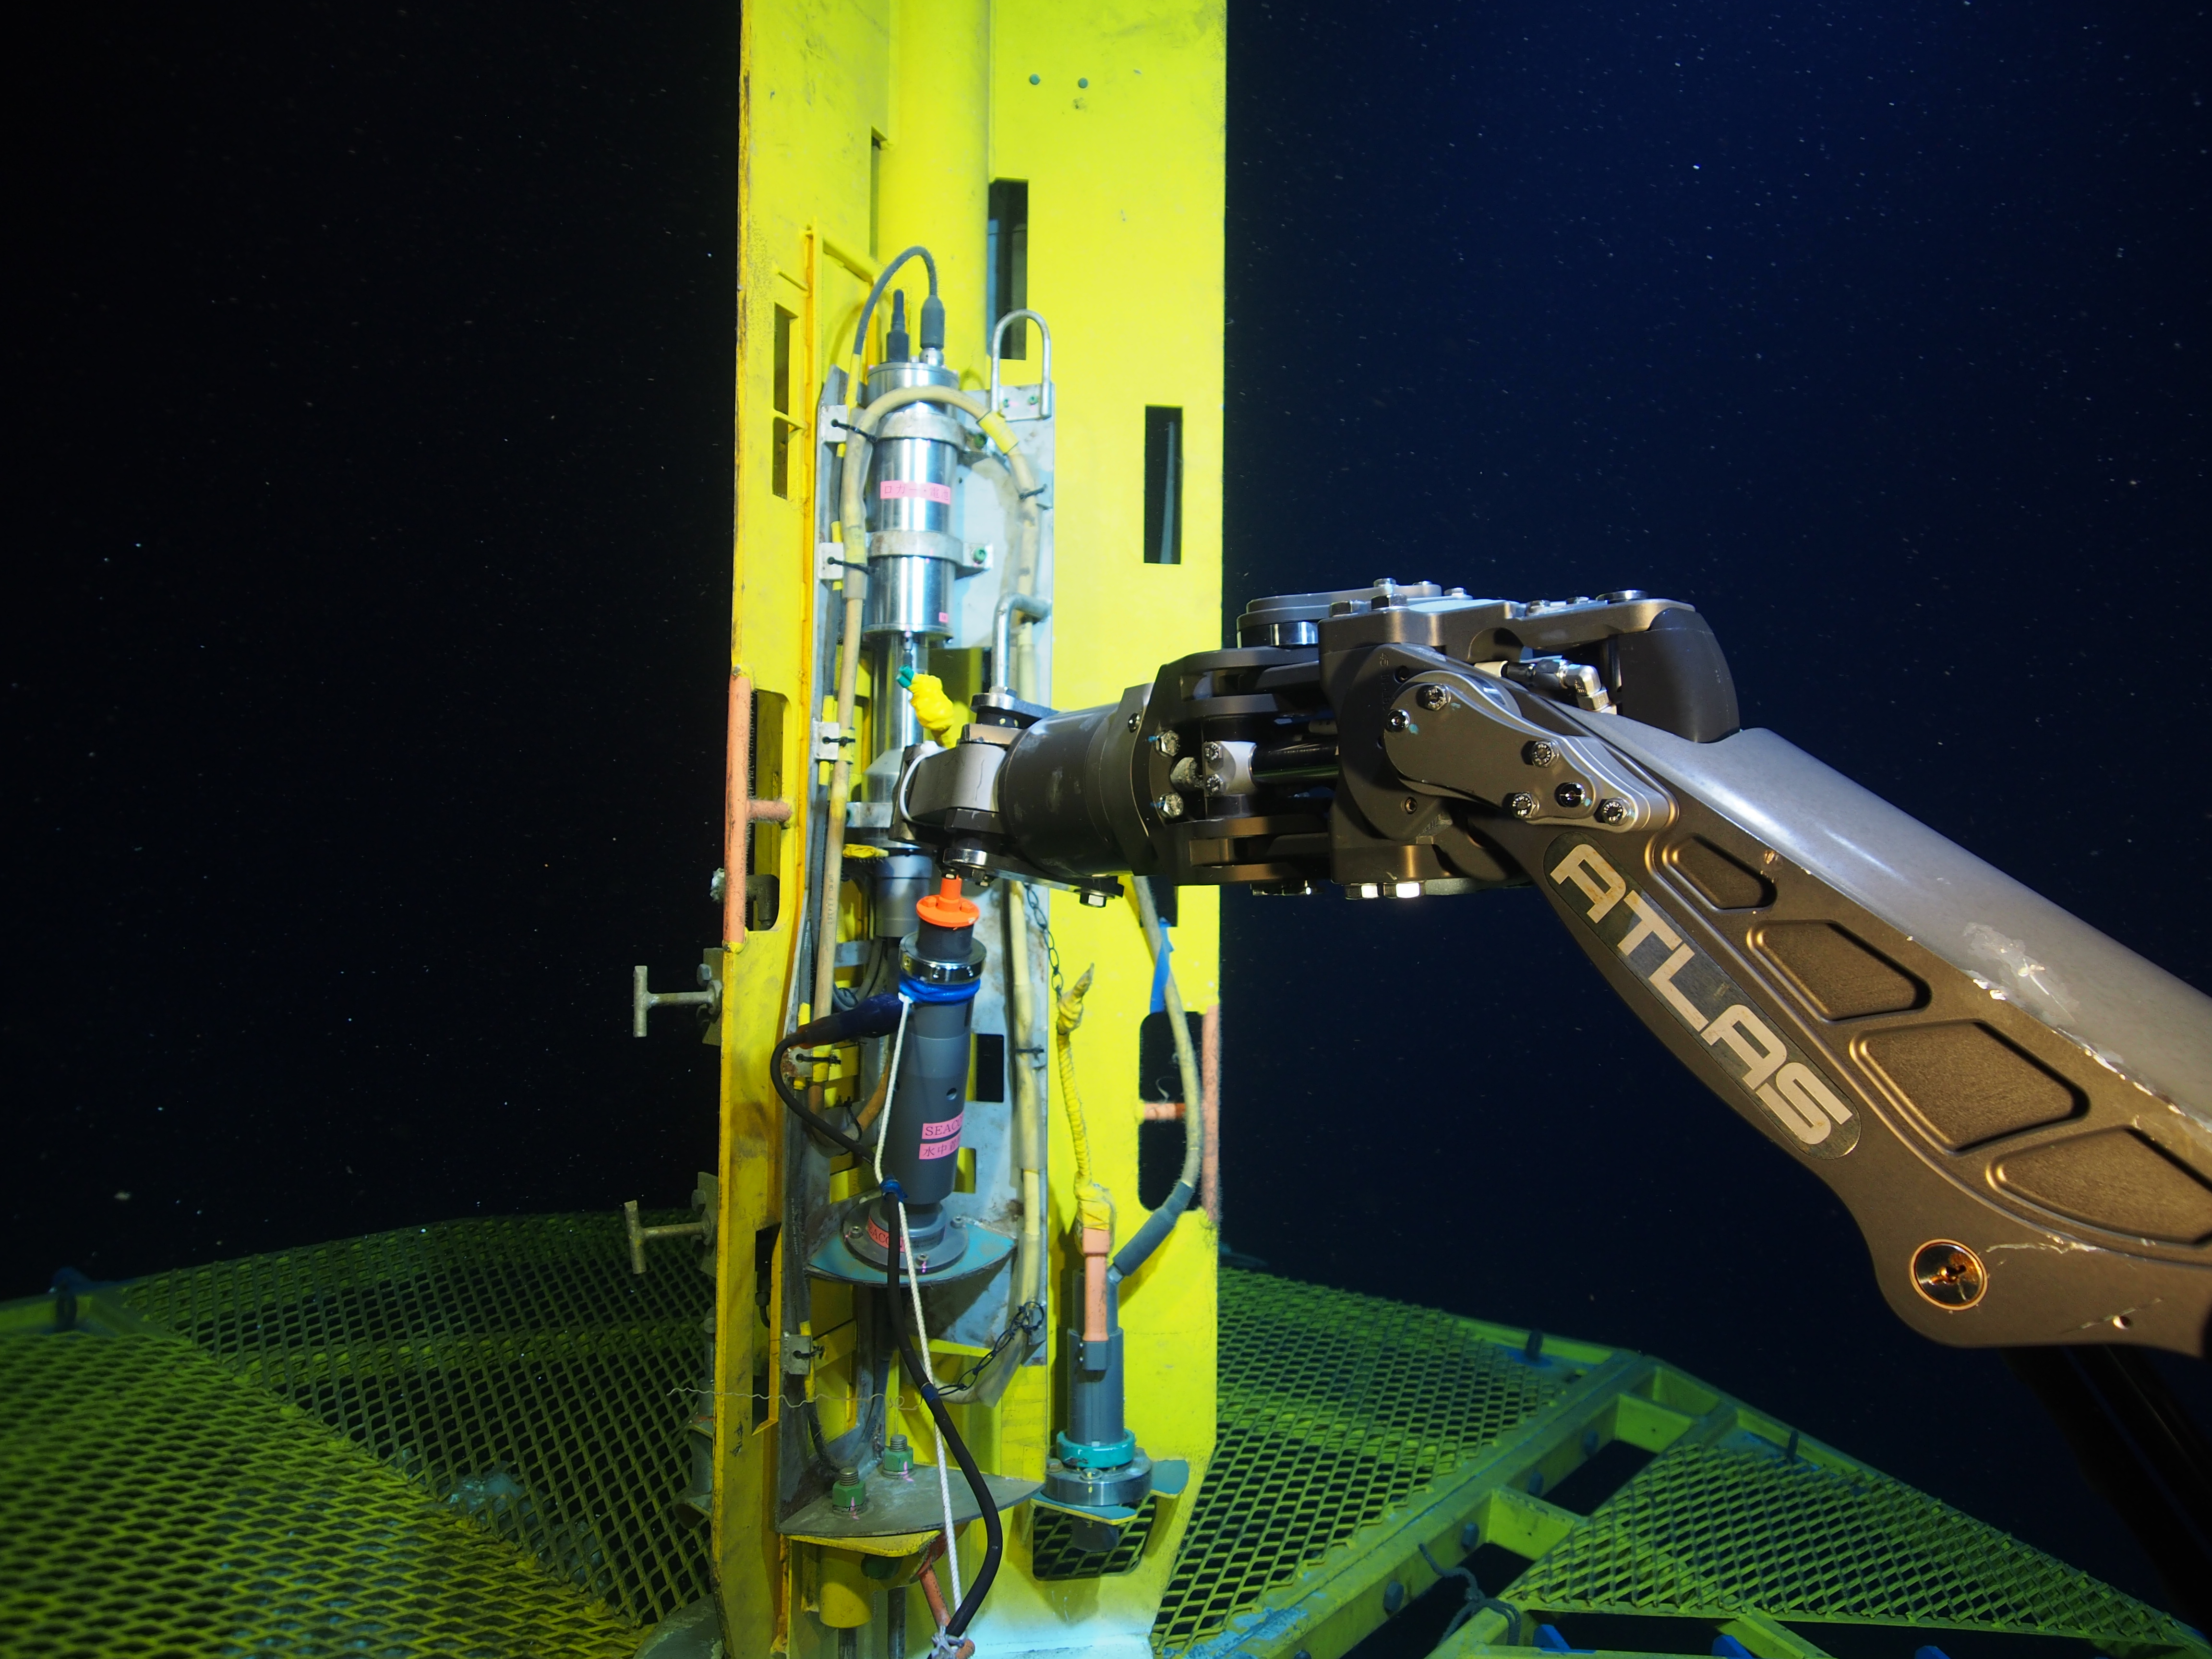 A dark blue background, a vertically orientated yellow metal shape in the center is held by a grey robot arm from the right.